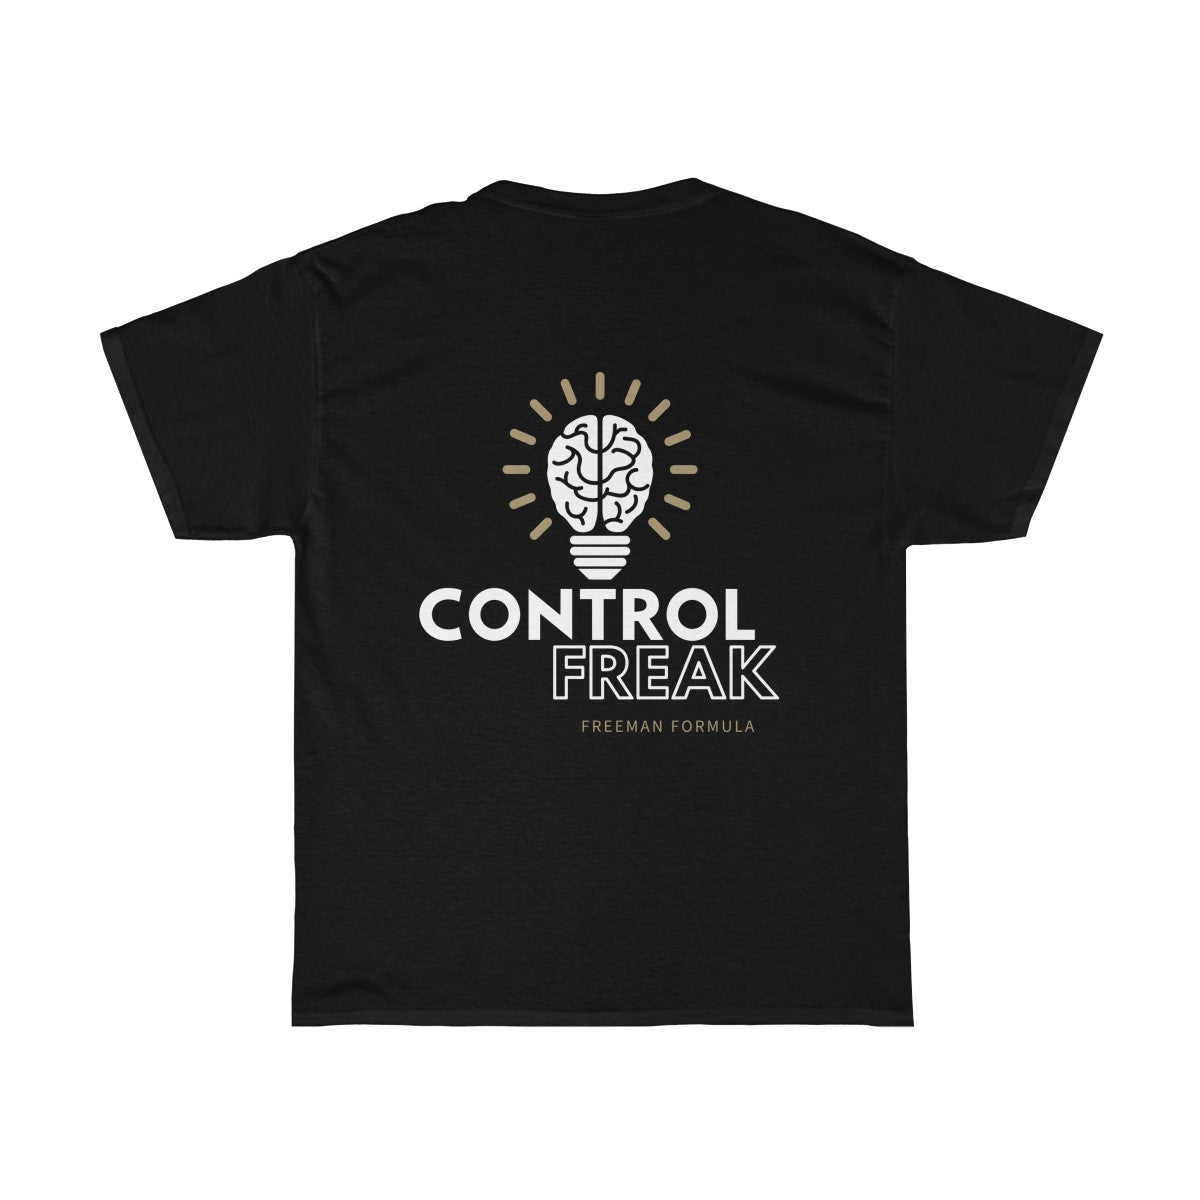 Are you a Control Freak?